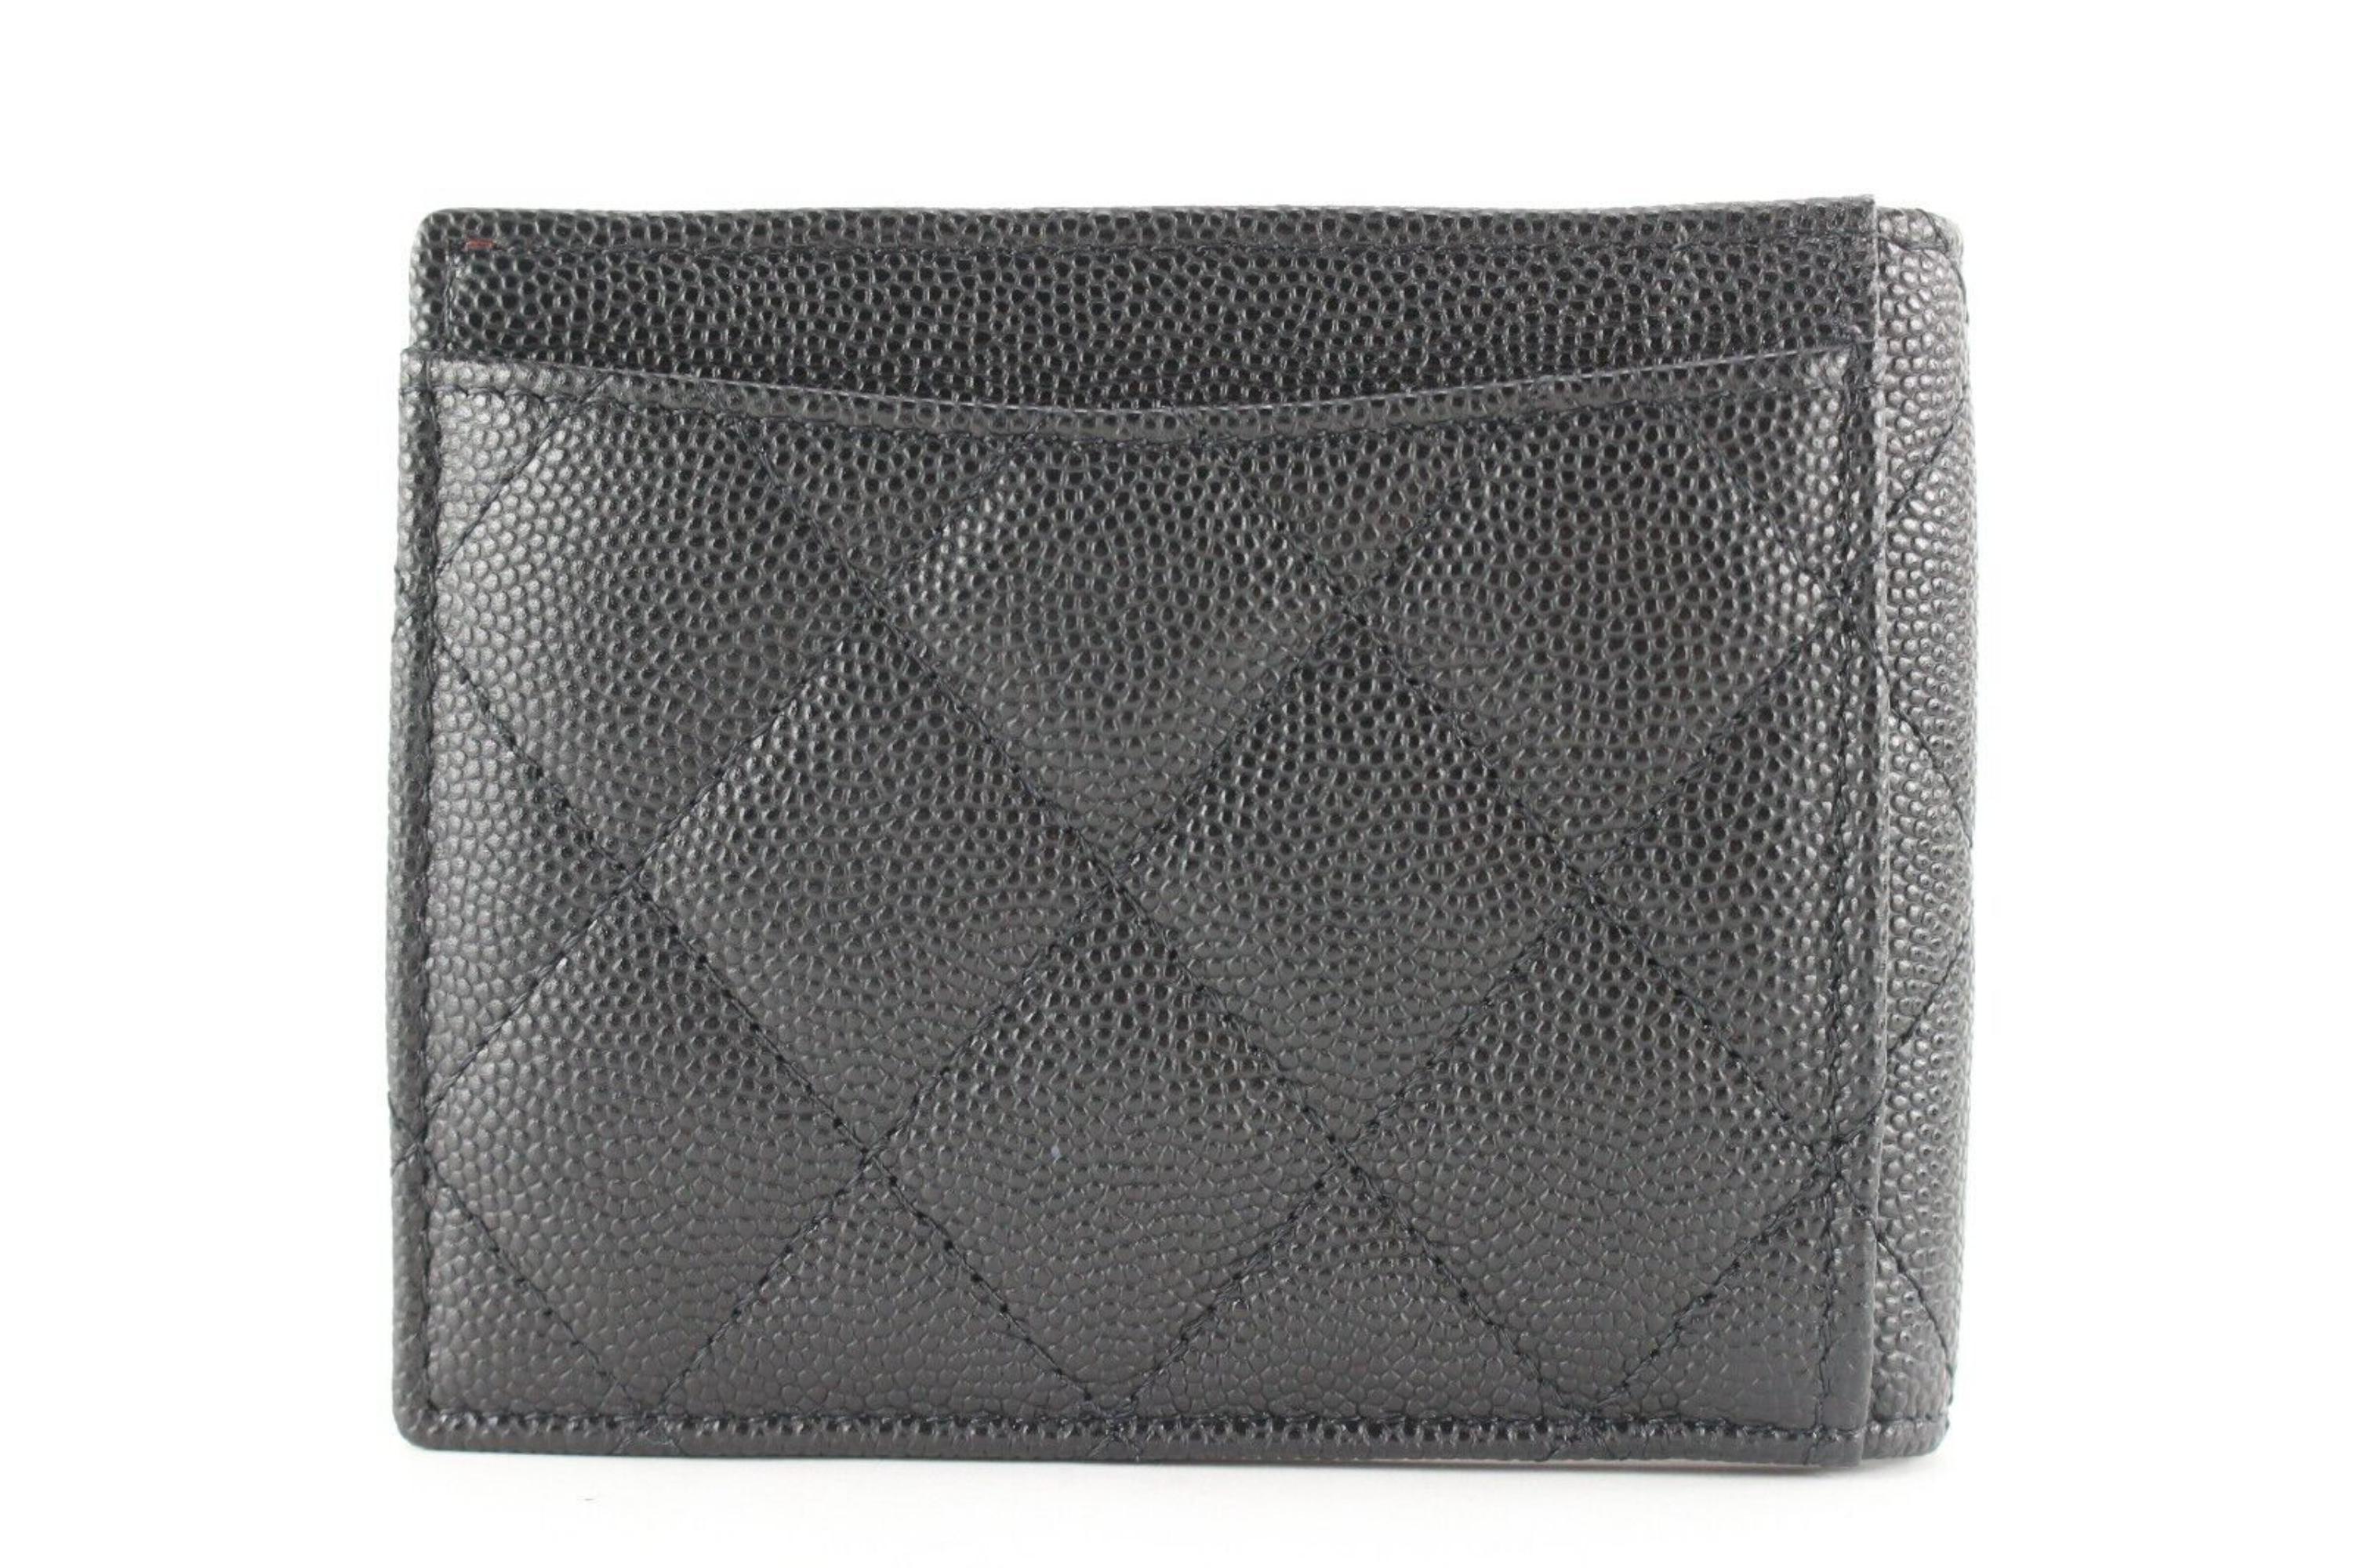 Women's Chanel Black Quilted Caviar Leather Bifold Wallet 1CK0215